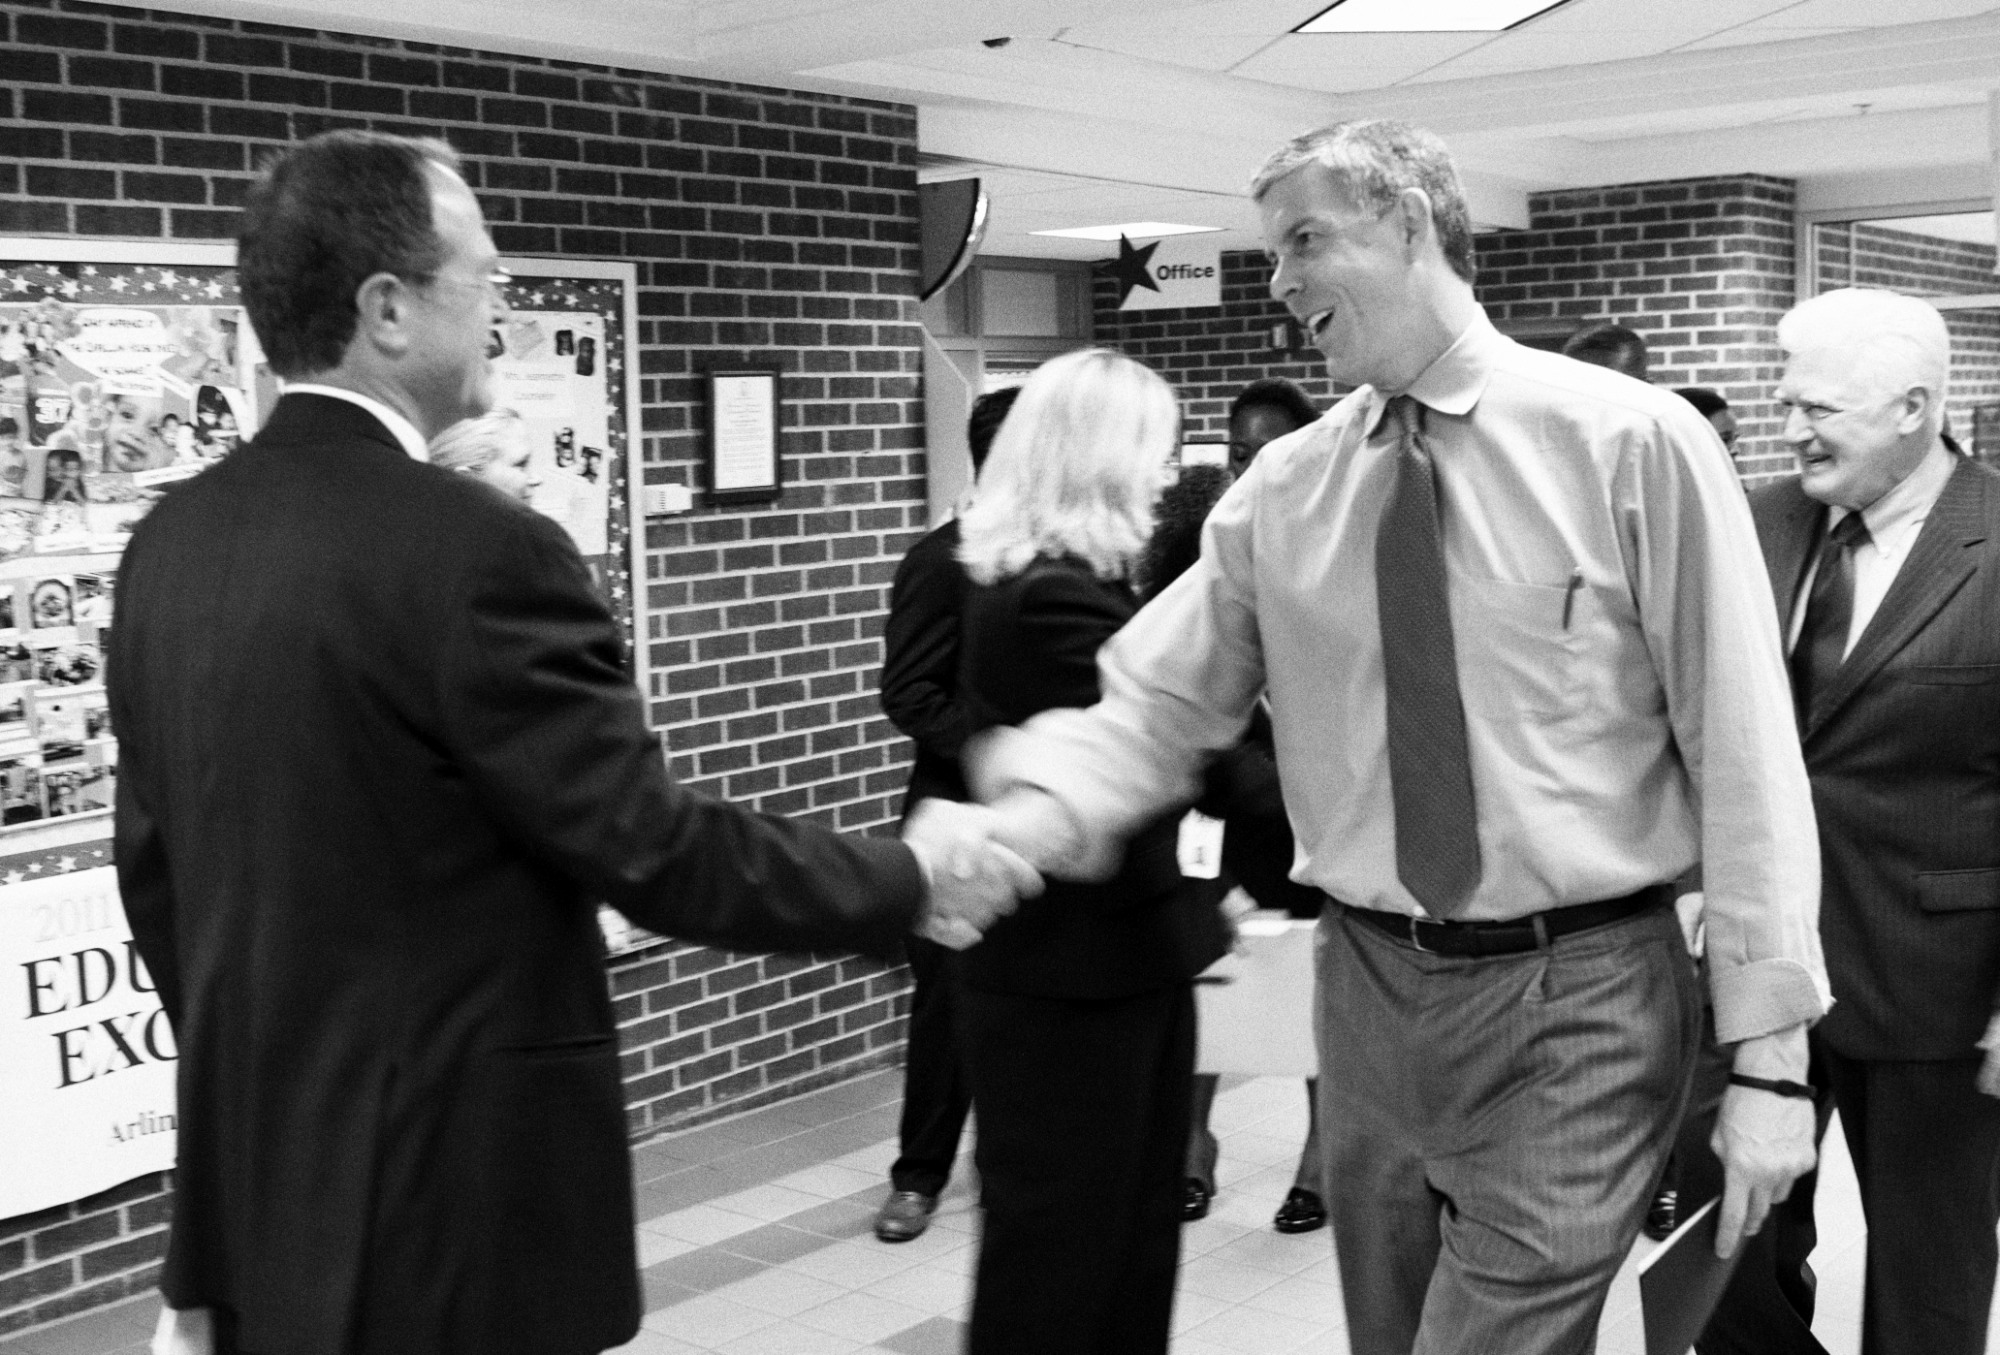 two men in business suits shaking hands in an office hallway